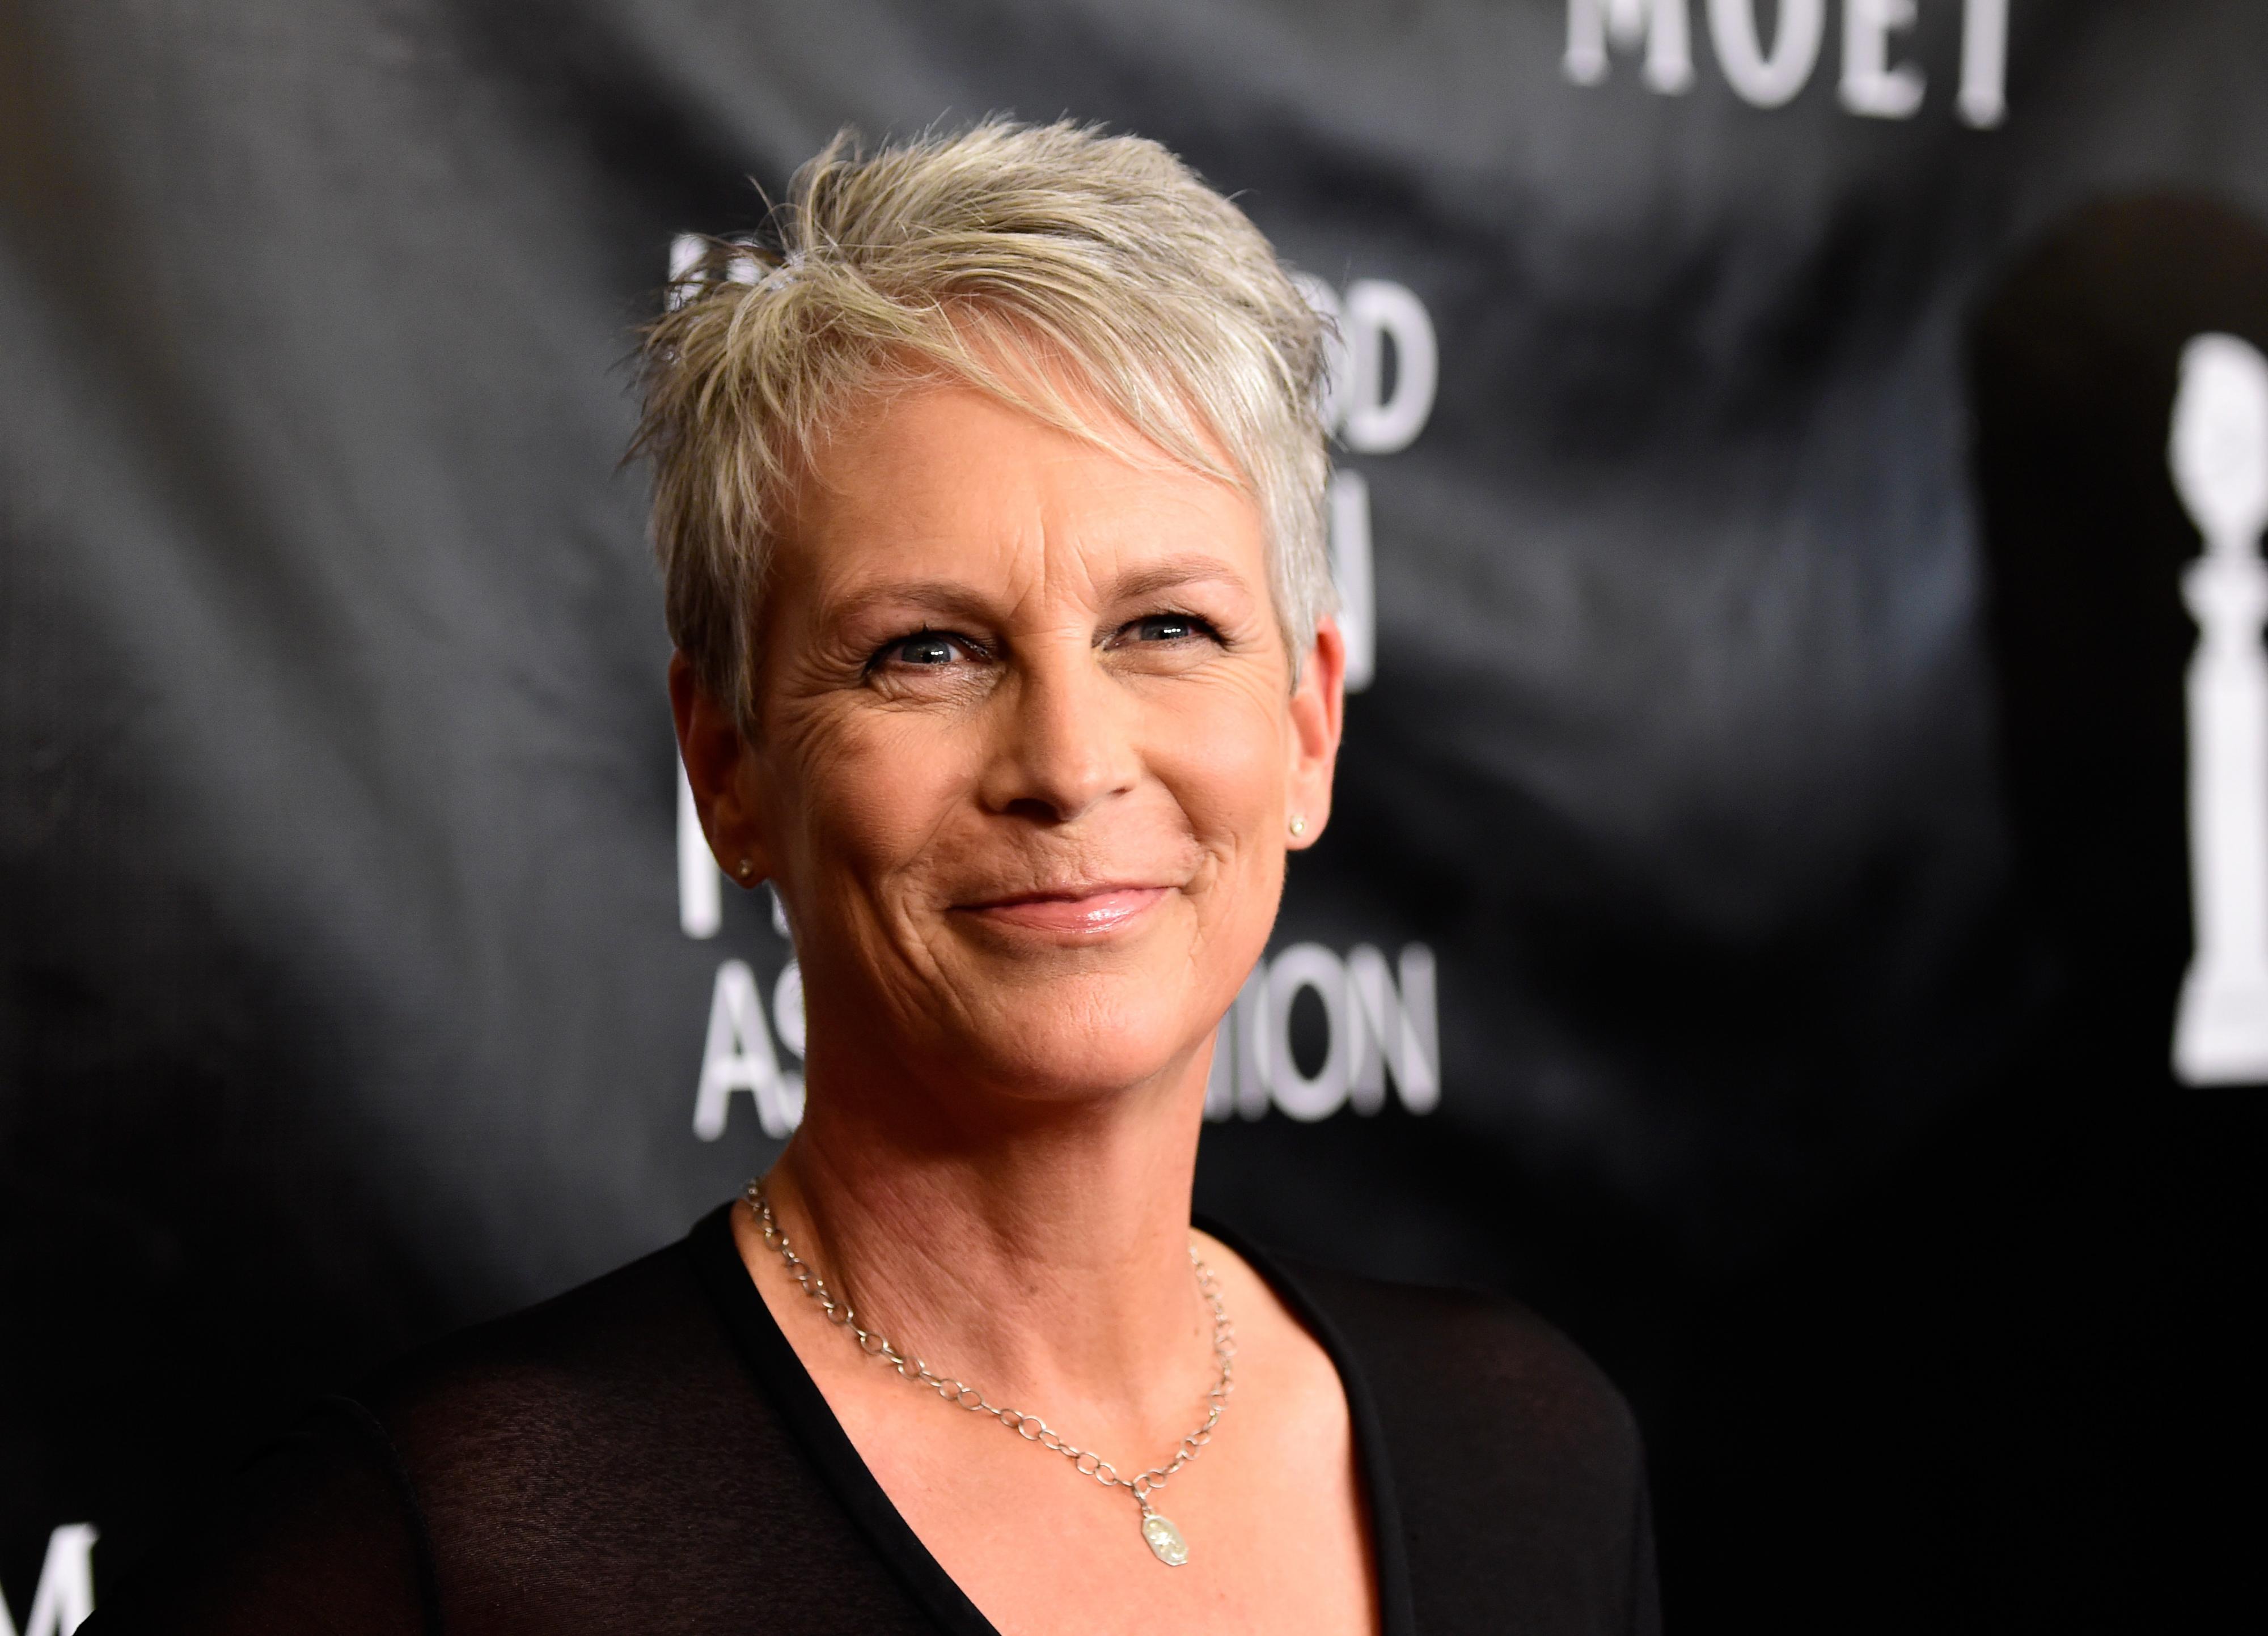 Jamie Lee Curtis attends event.